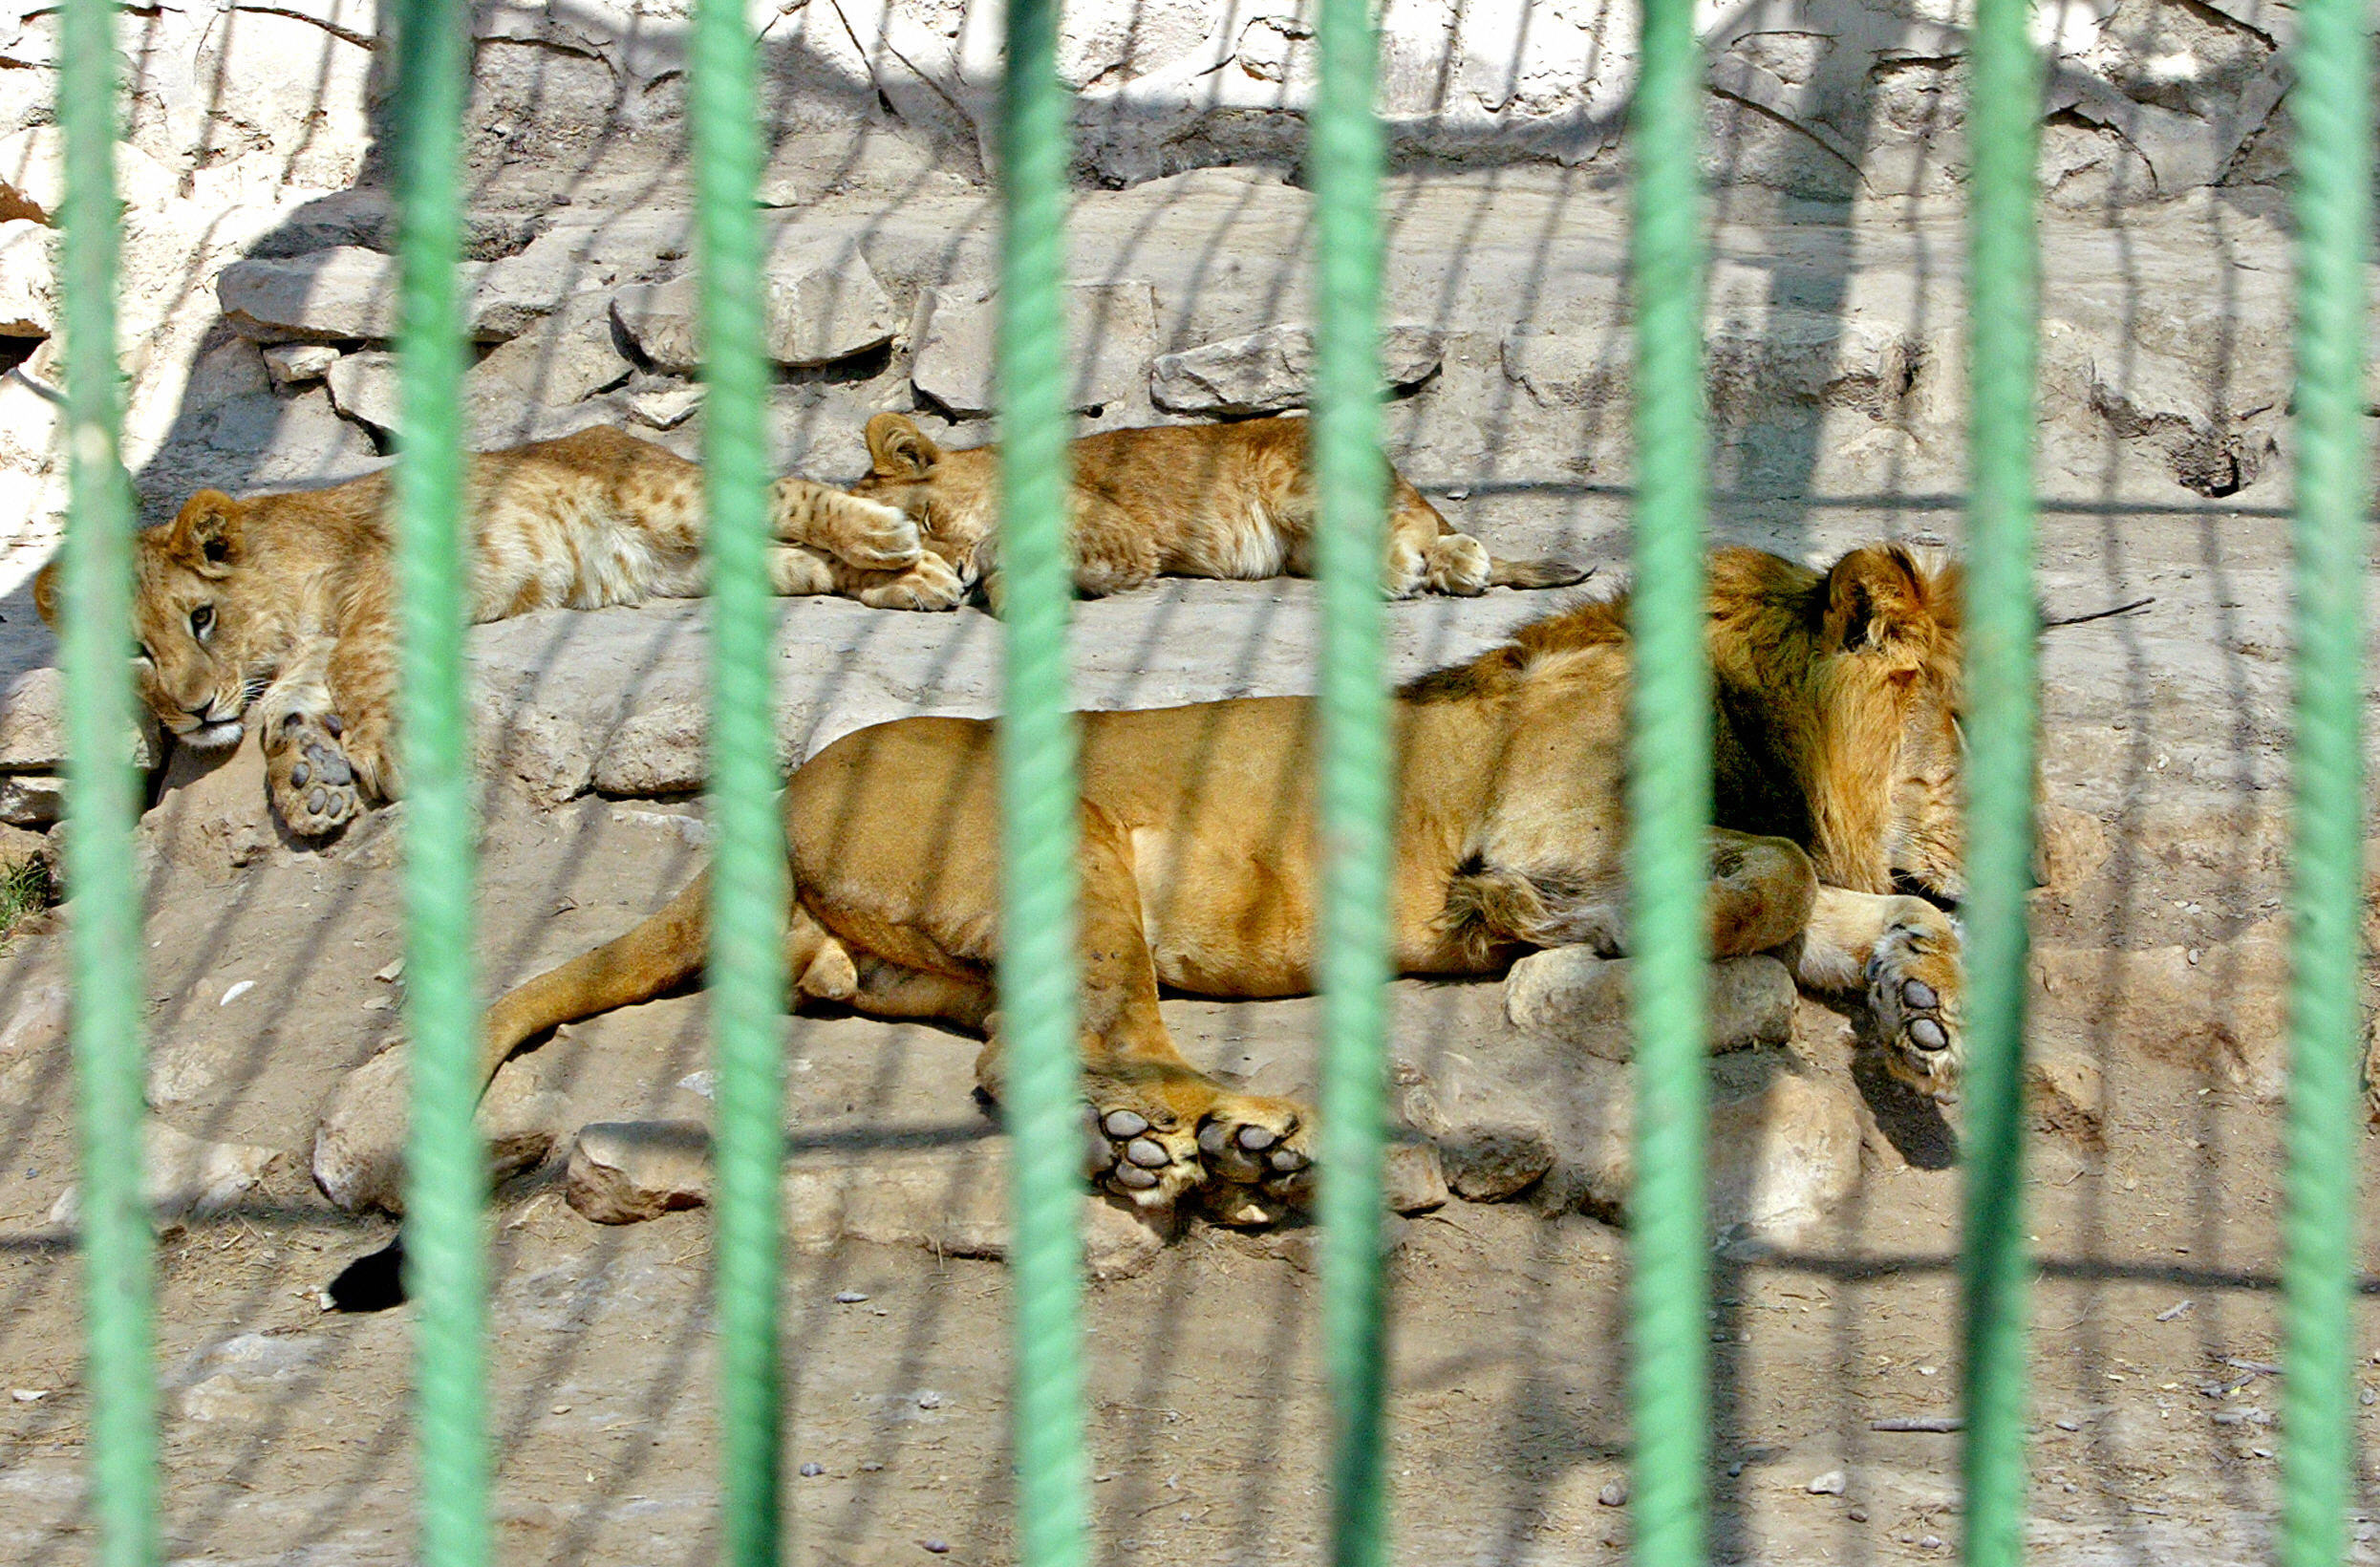 SABAH ARAR/AFP/Getty Images. A lion and lionesses enjoy Baghdad's sun as they rest inside their cage.